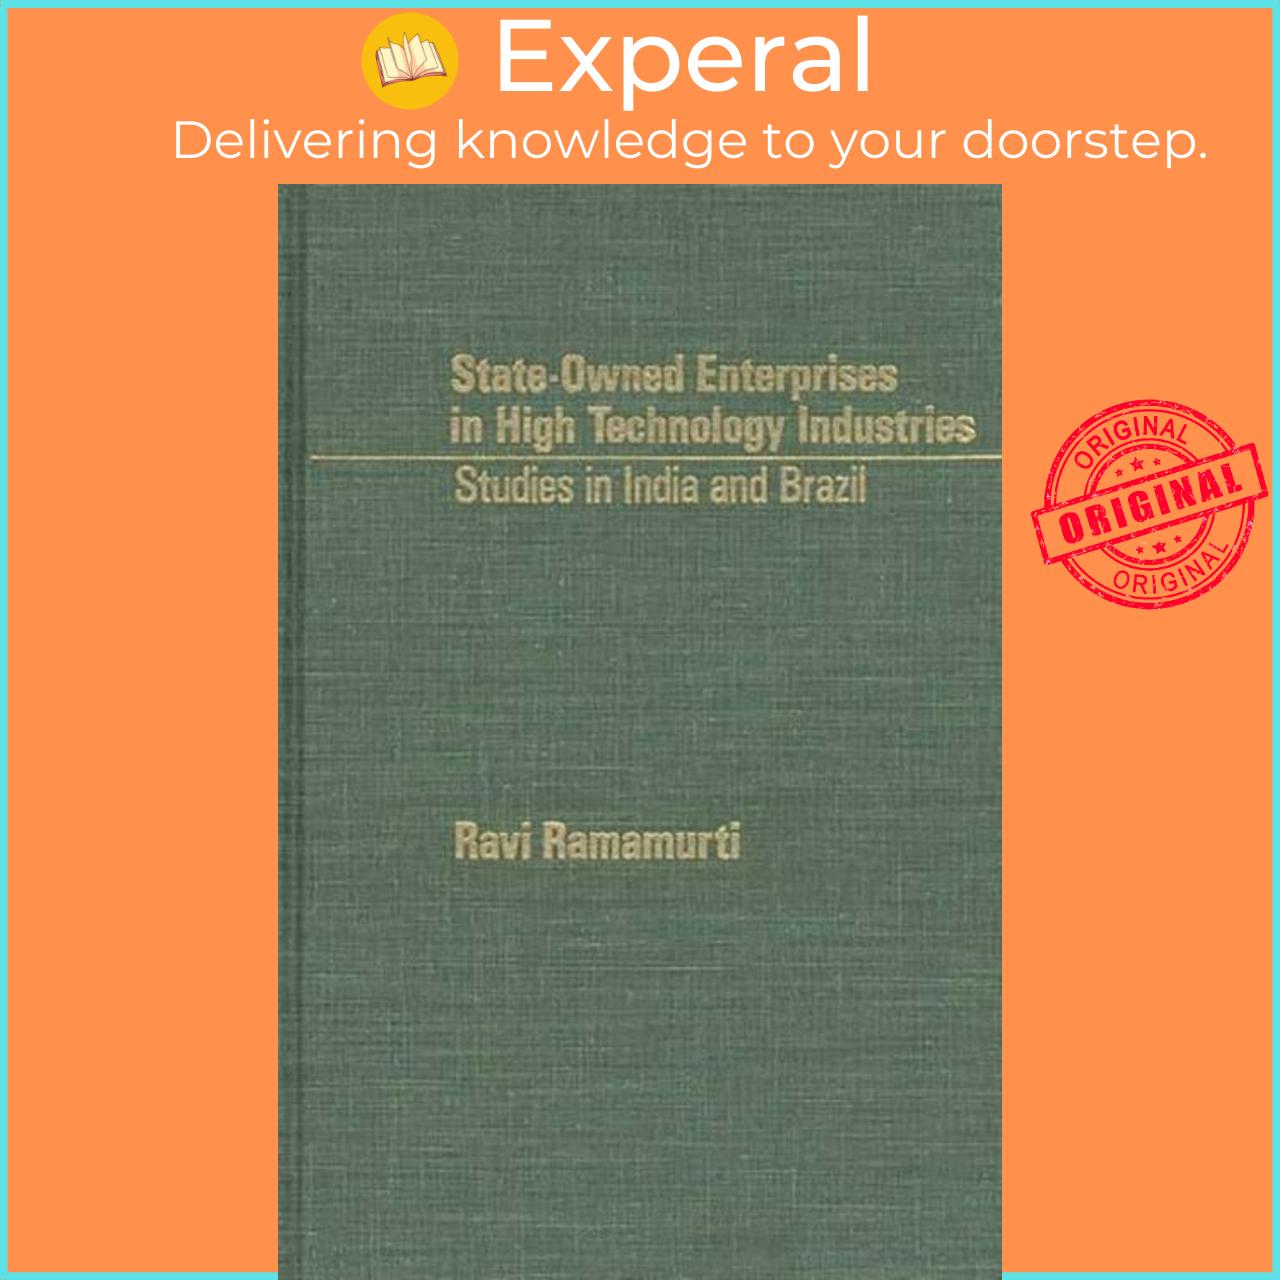 Sách - State-Owned Enterprises in High Technology Industries - Stus in Indi by Rami Ramamurti (UK edition, hardcover)